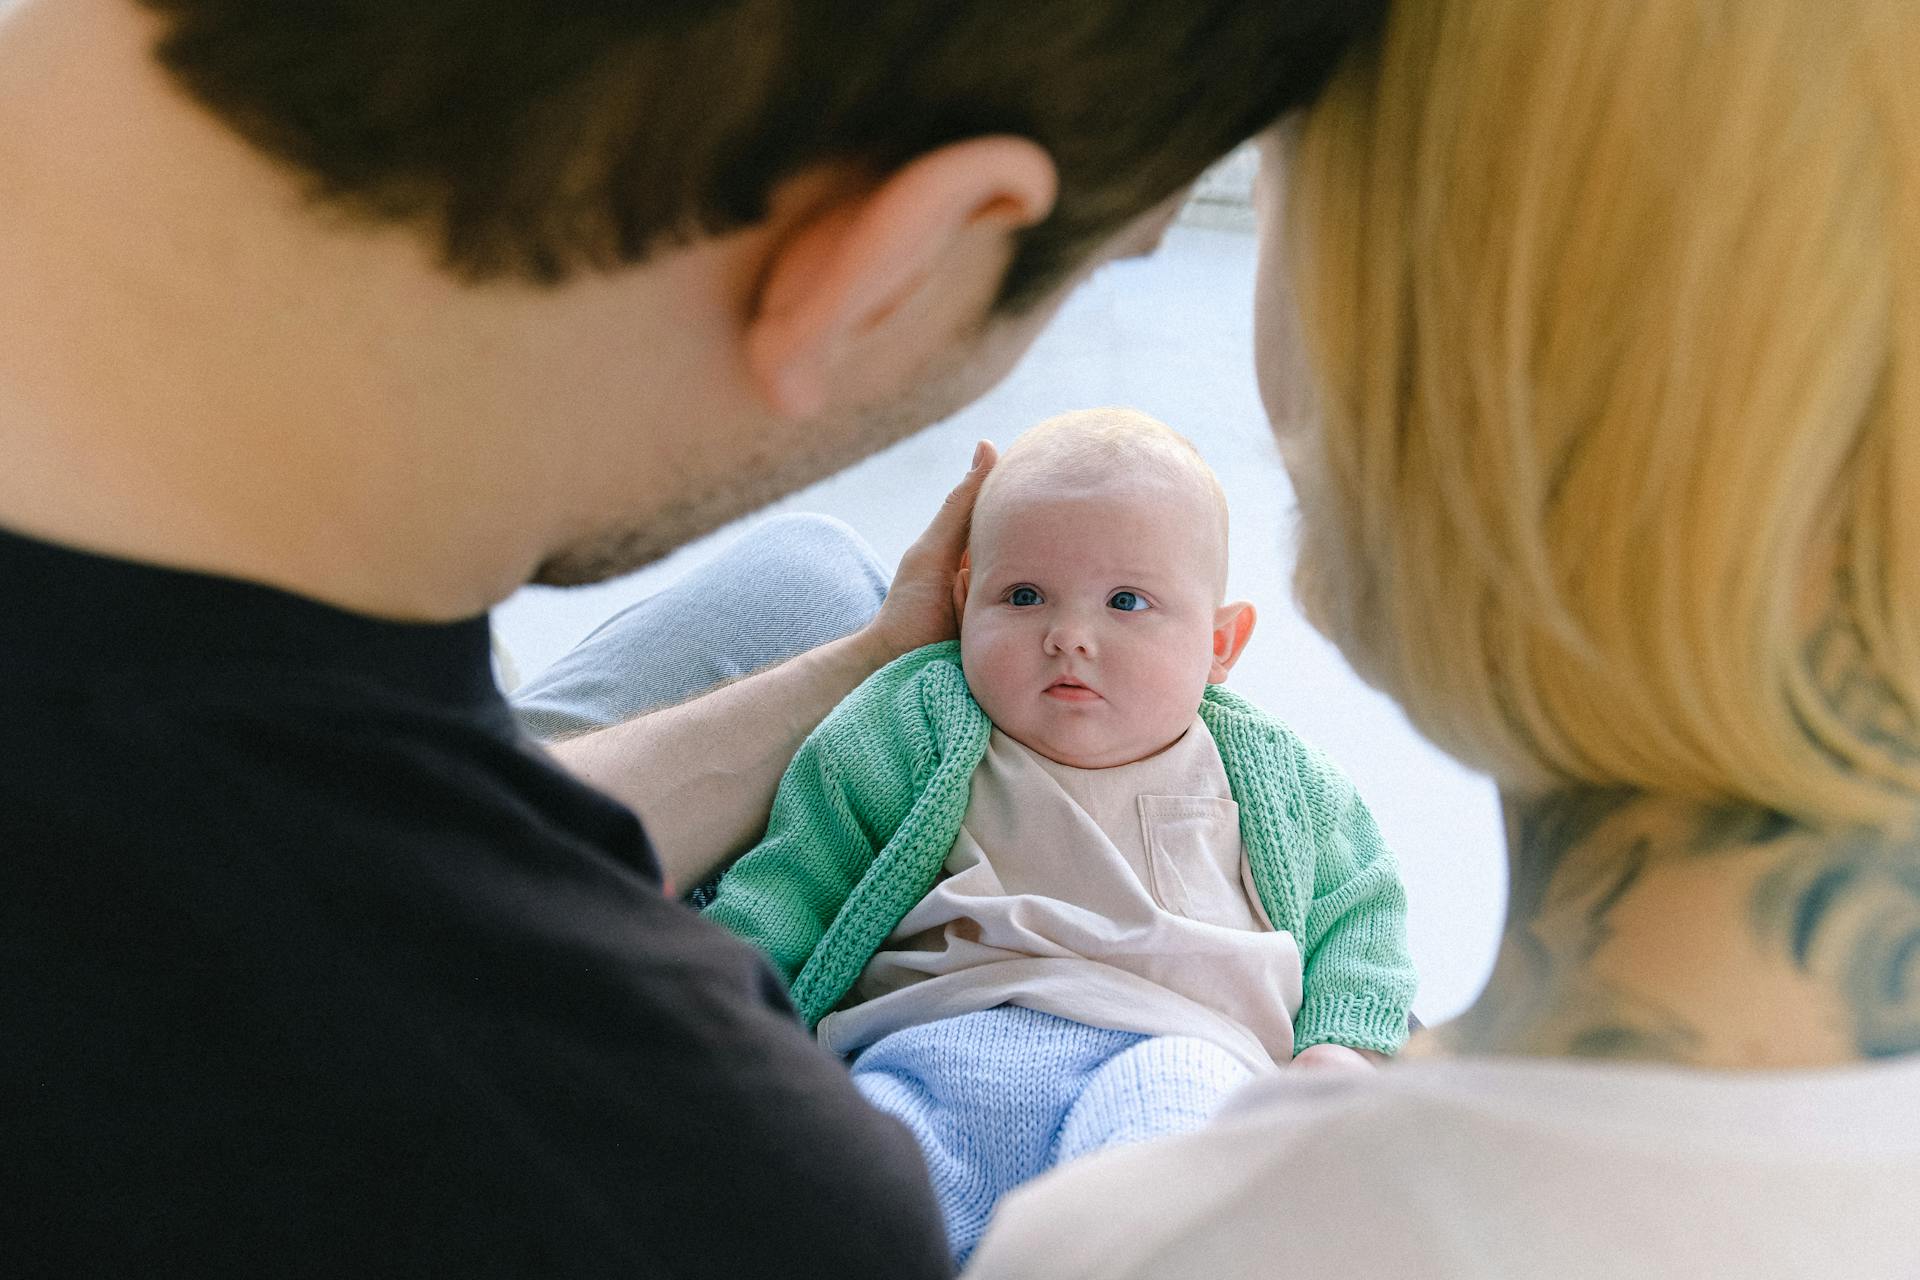 A couple holding a baby | Source: Pexels